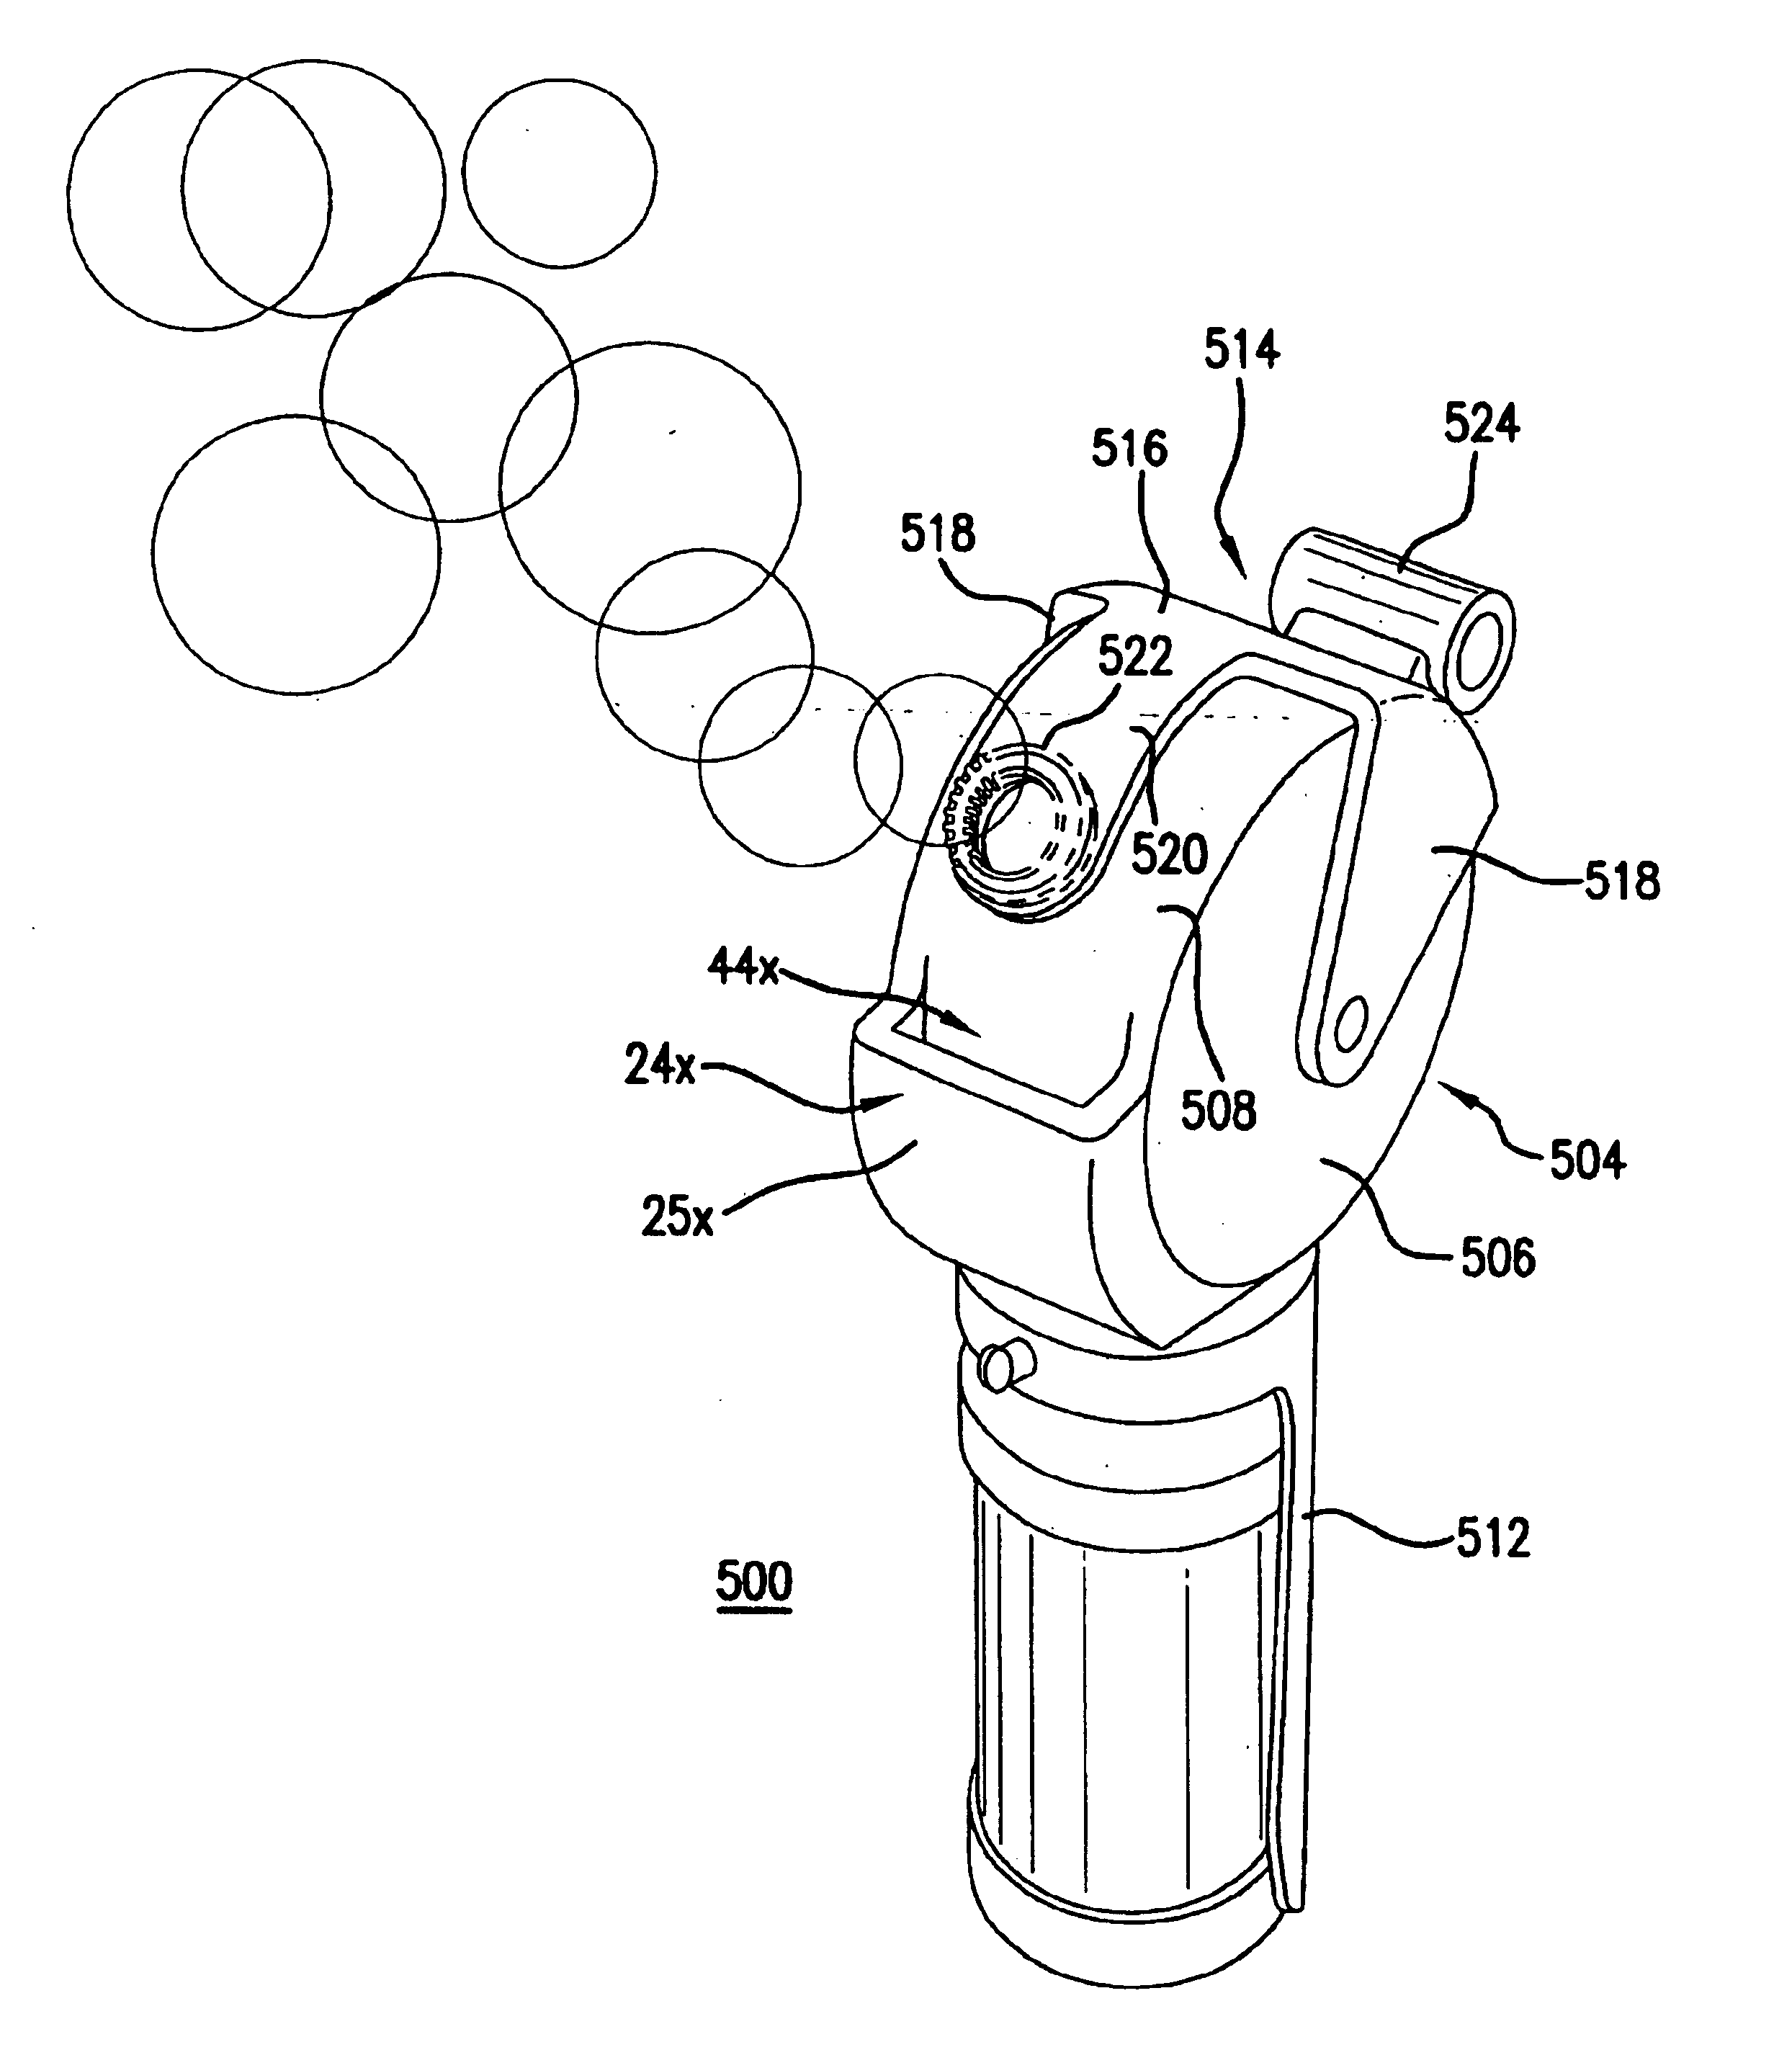 Apparatus and method for delivering bubble solution to a dipping container